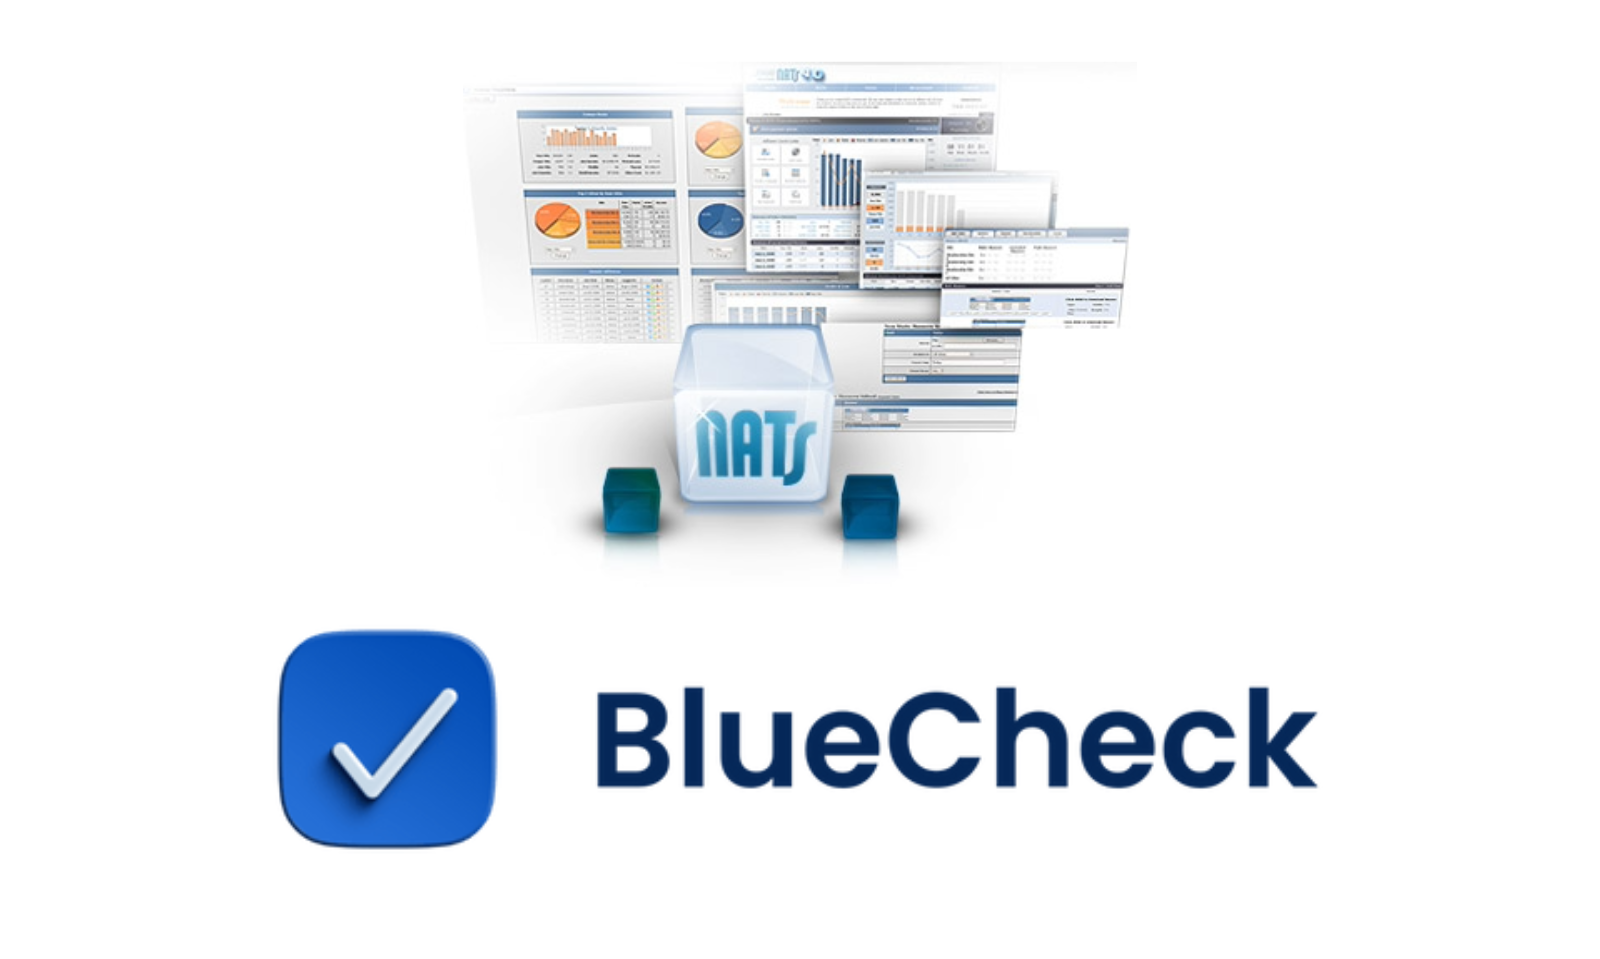 BlueCheck and NATS Partner to Provide Age Verification